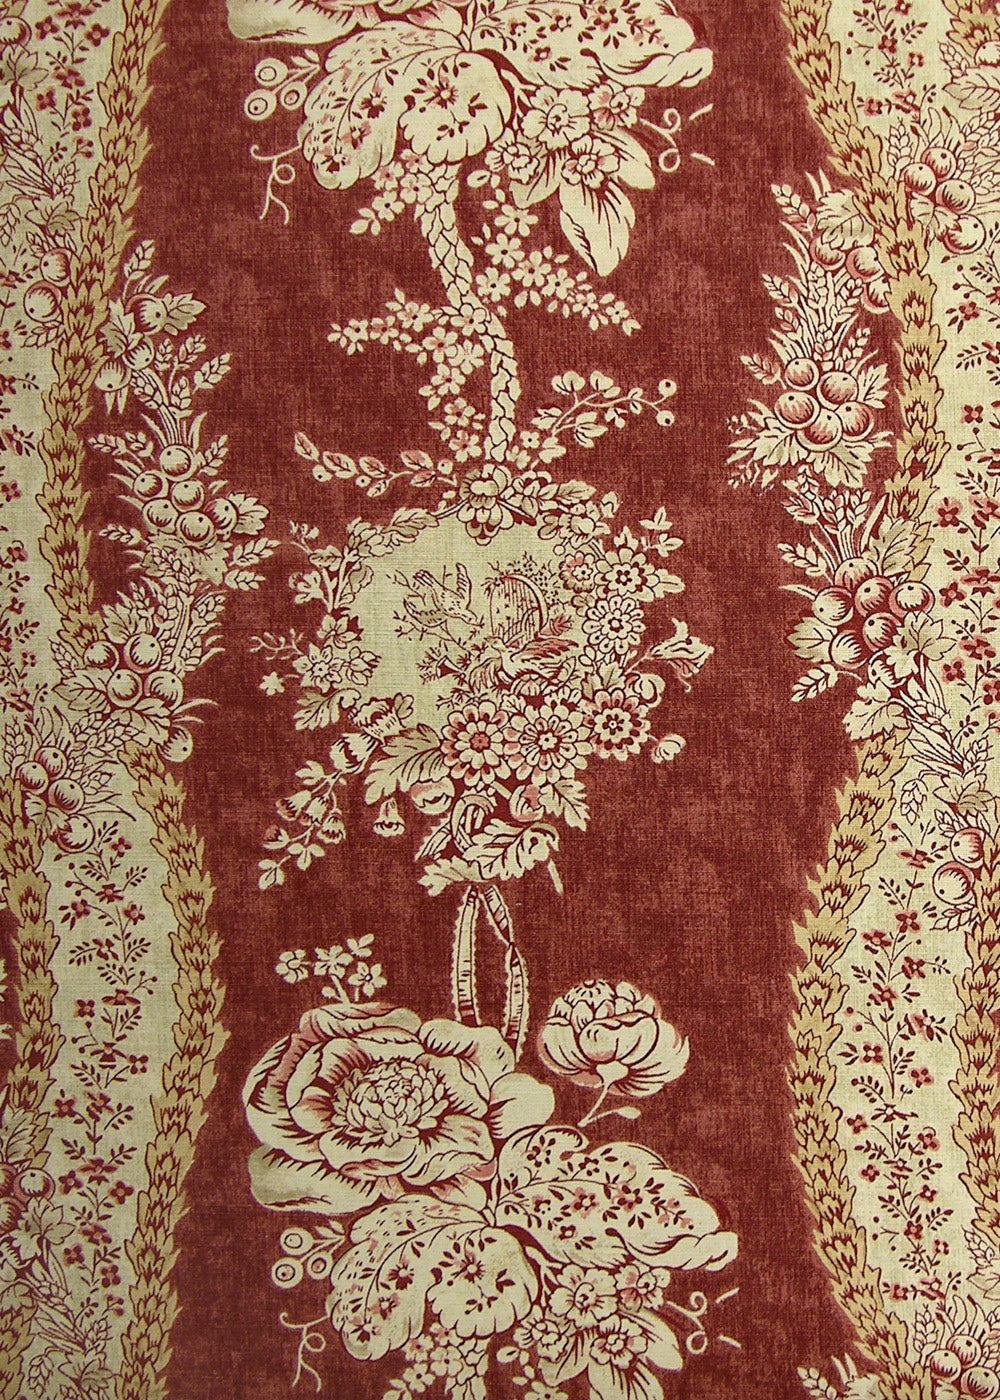 red fabric with a monochromatic pattern of florals, vines, and berries